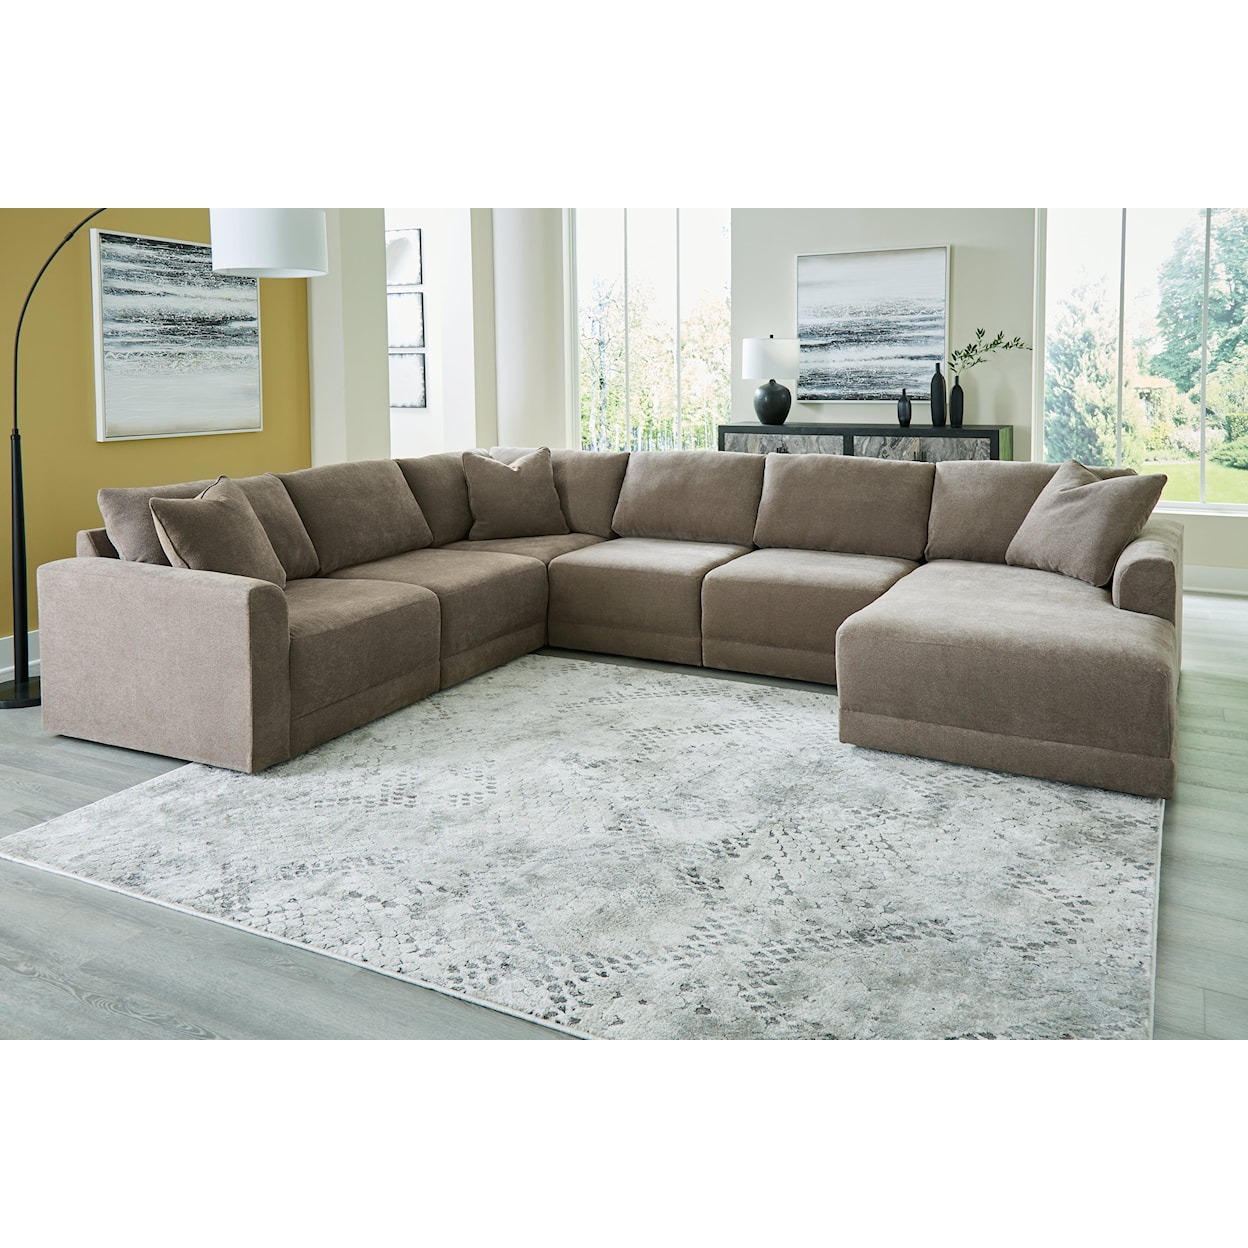 JB King Raeanna 6-Piece Sectional With Chaise